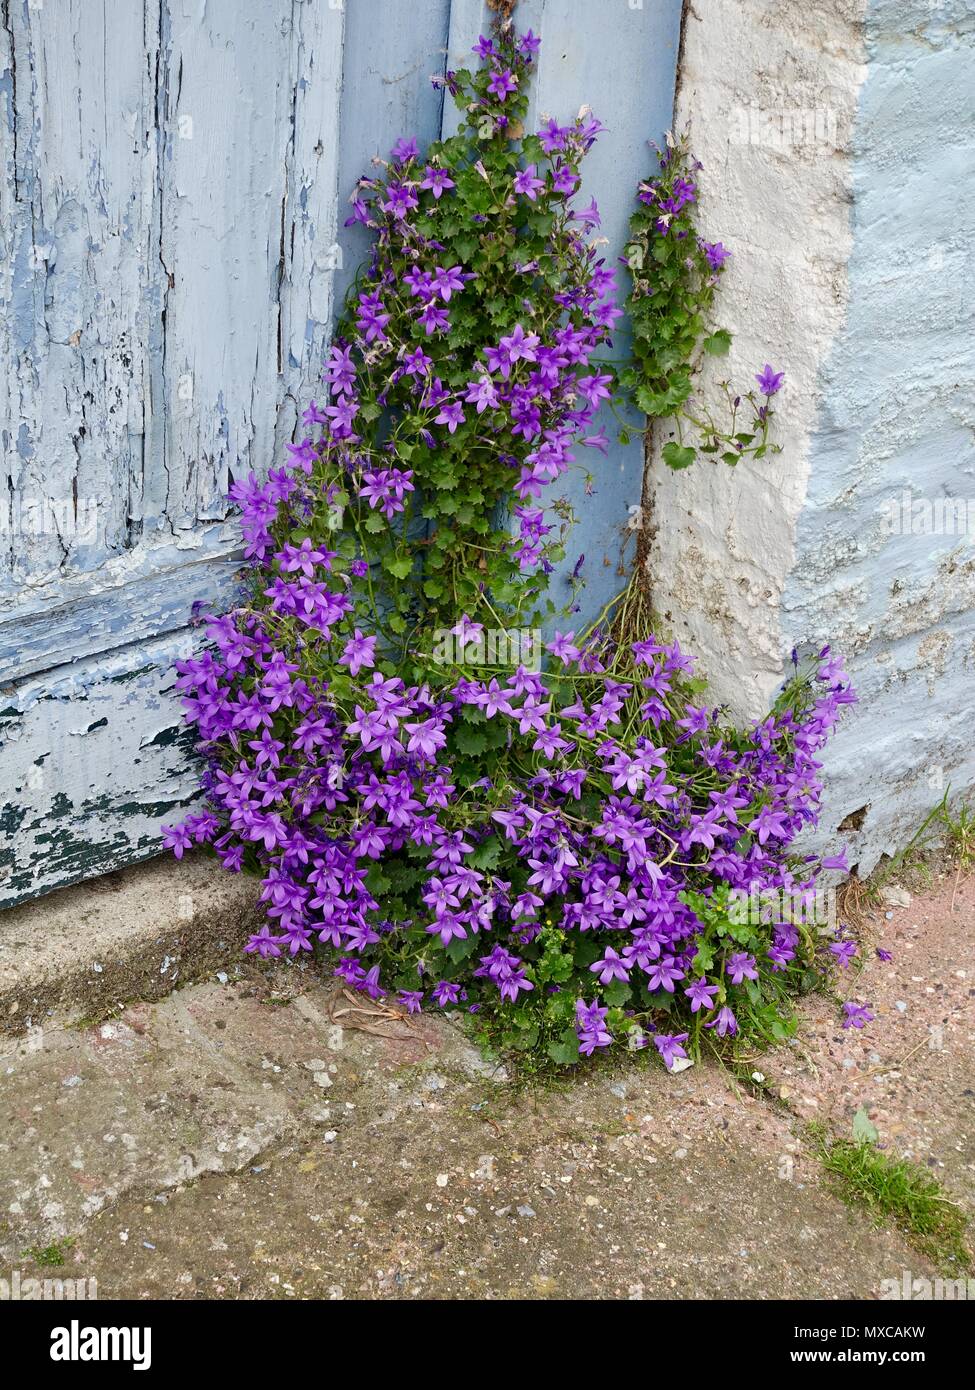 Purple flowering plant,Campanula portenschlagiana, commonly known as Bellflowers, growing in the corner of an ancient  doorway in Northern France. Stock Photo